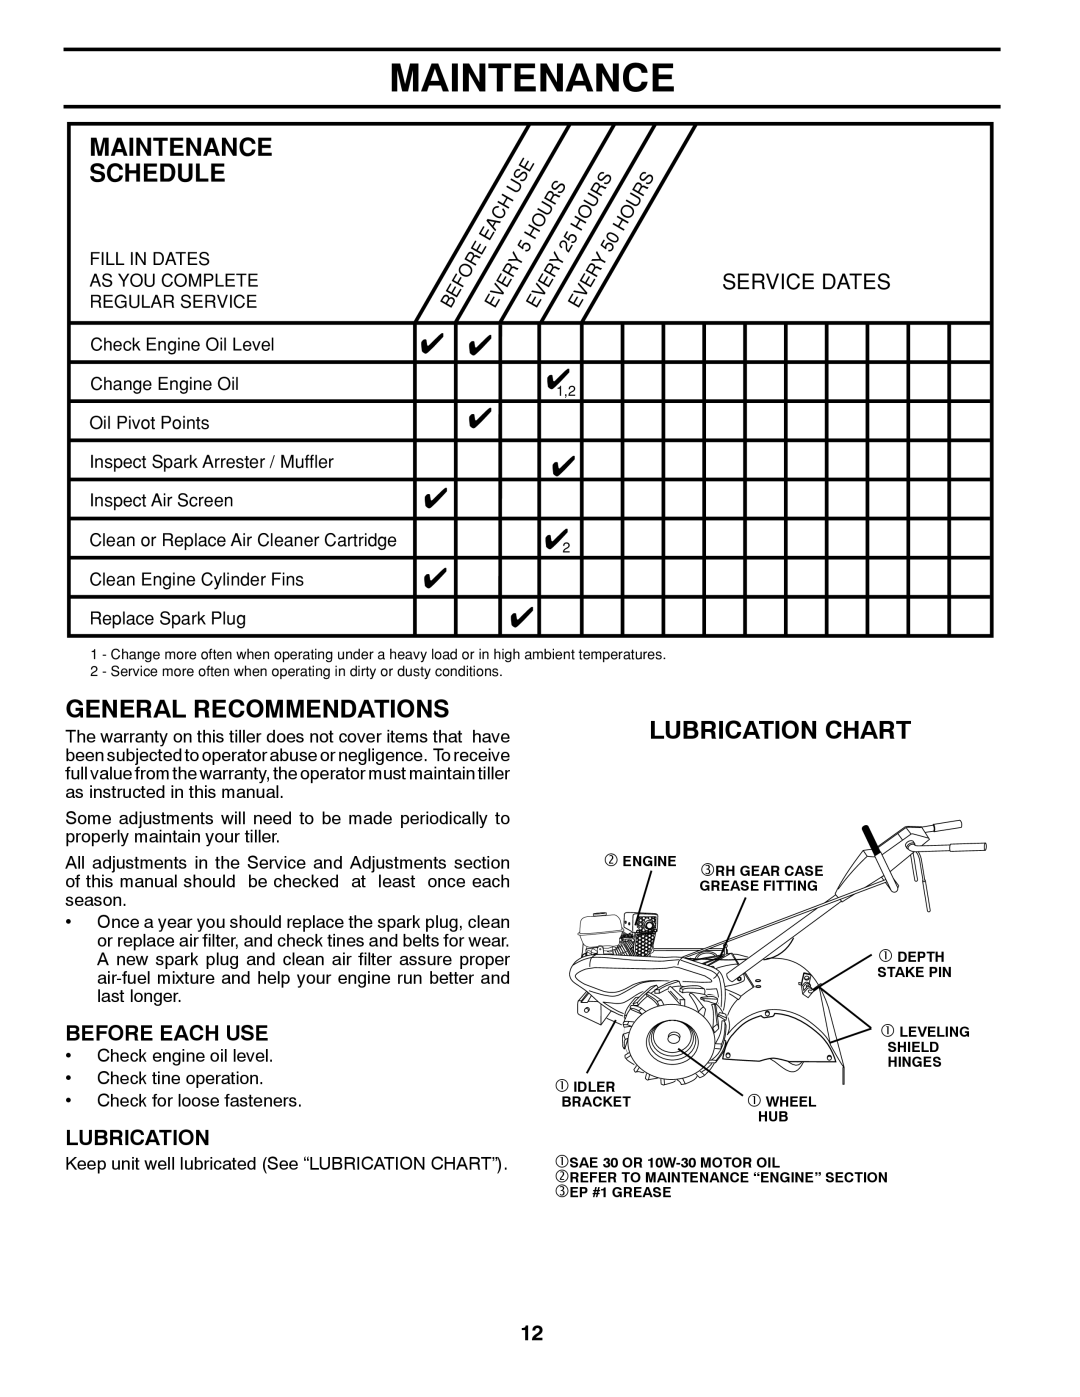 Poulan PRRT900 Maintenance, 4%.!.#% 3#%$5,%, General Recommendations, Lubrication Chart, 3%26#%ª$!4%3, Before Each Use 